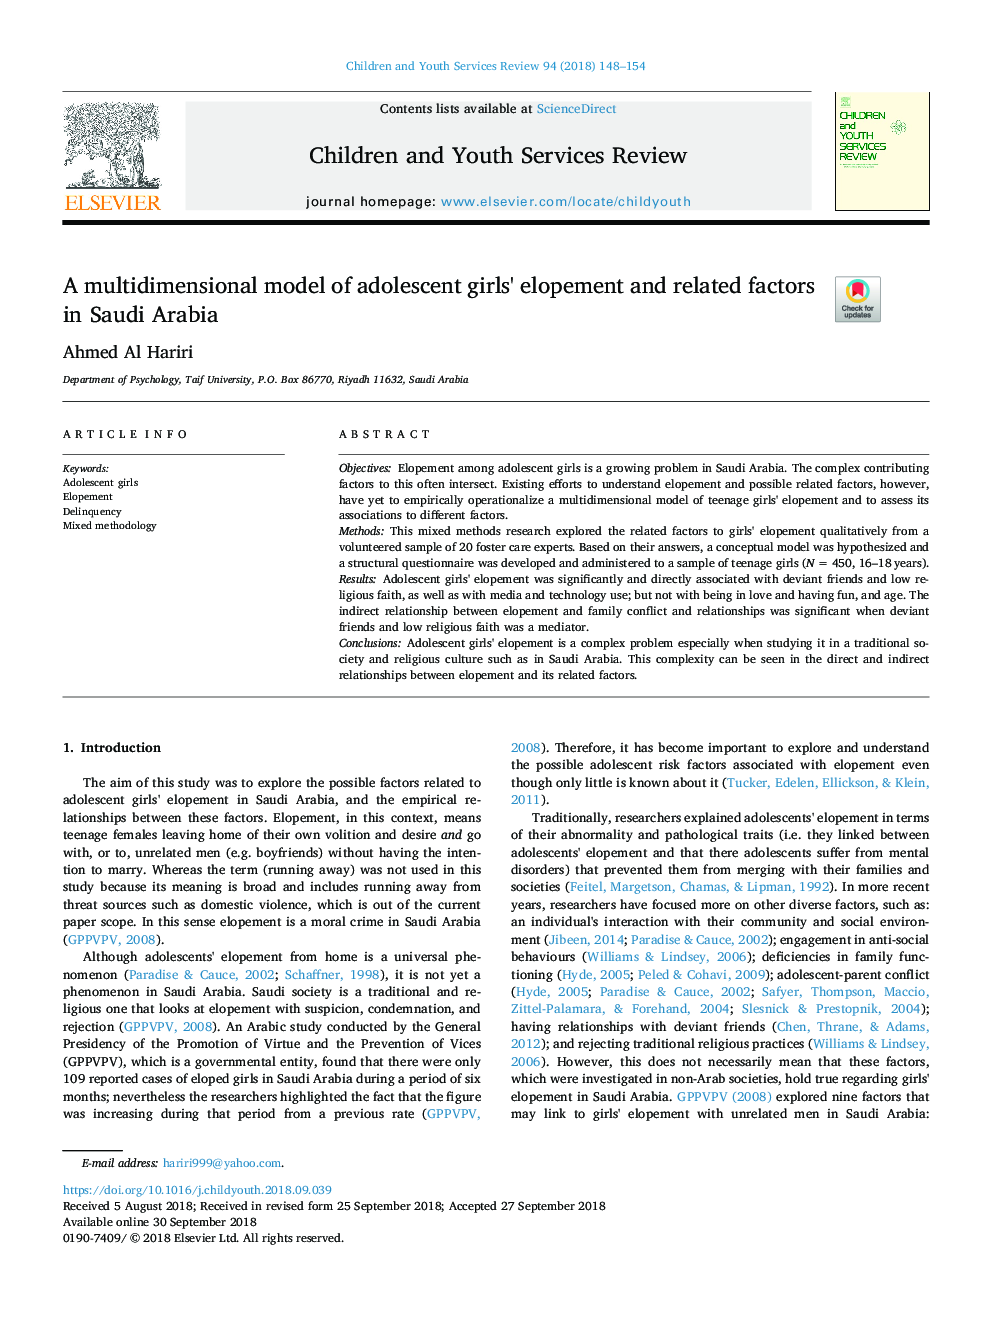 A multidimensional model of adolescent girls' elopement and related factors in Saudi Arabia